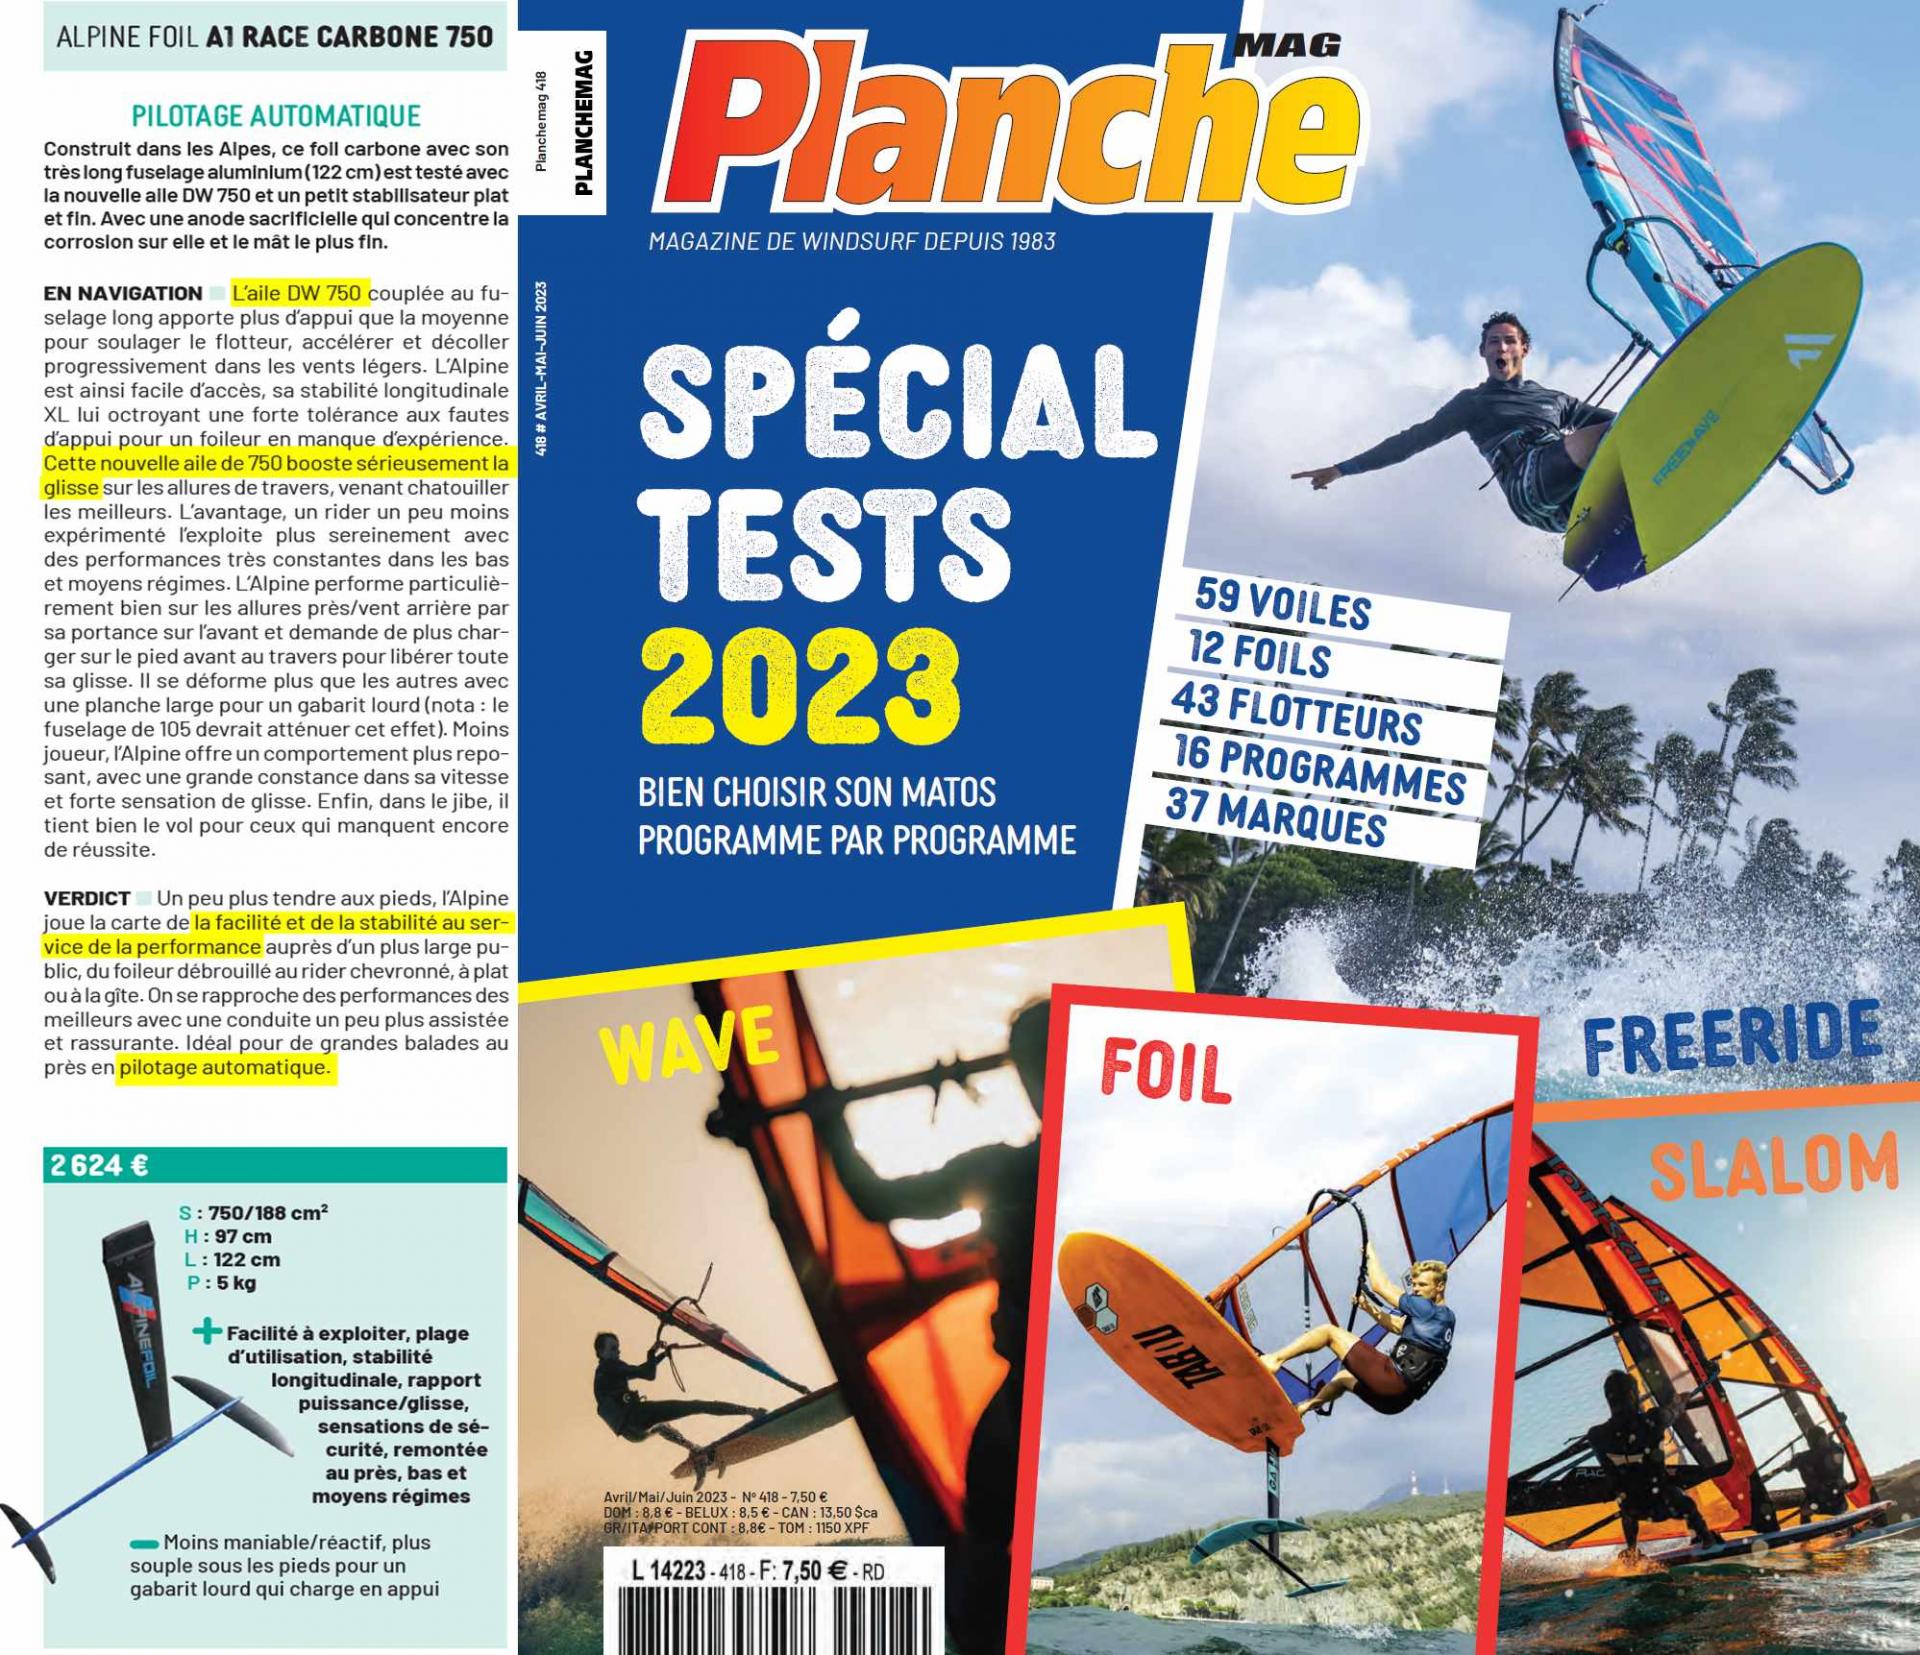 Planche mag special test 2023 5